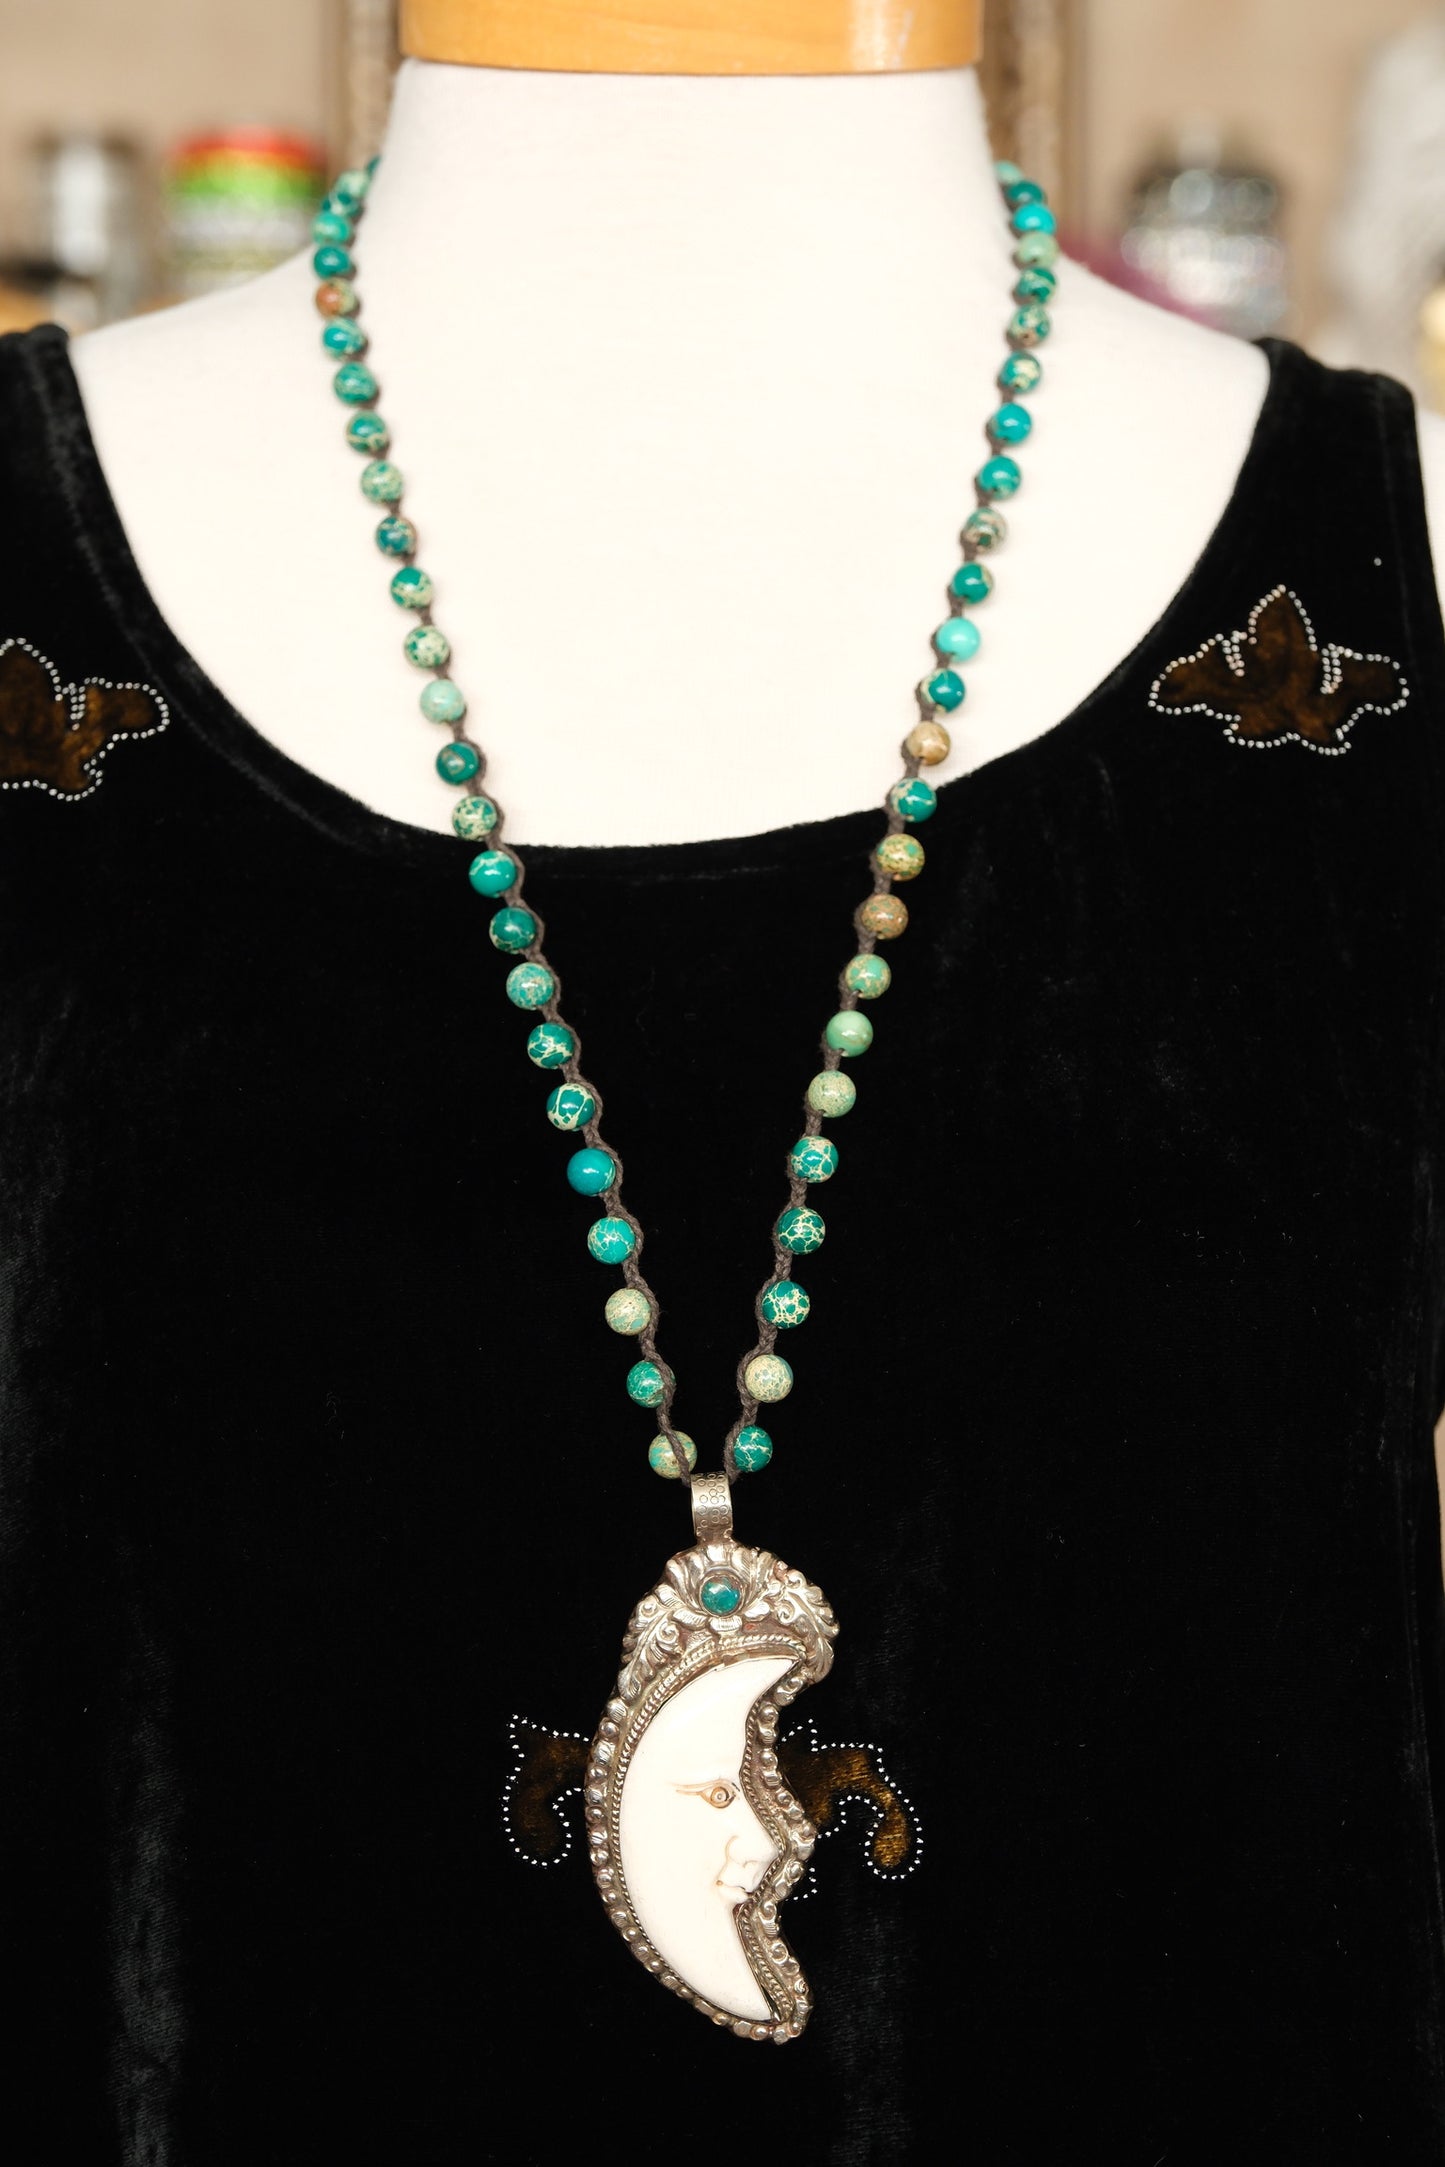 Bejeweled Crescent Moon Pendent Necklace